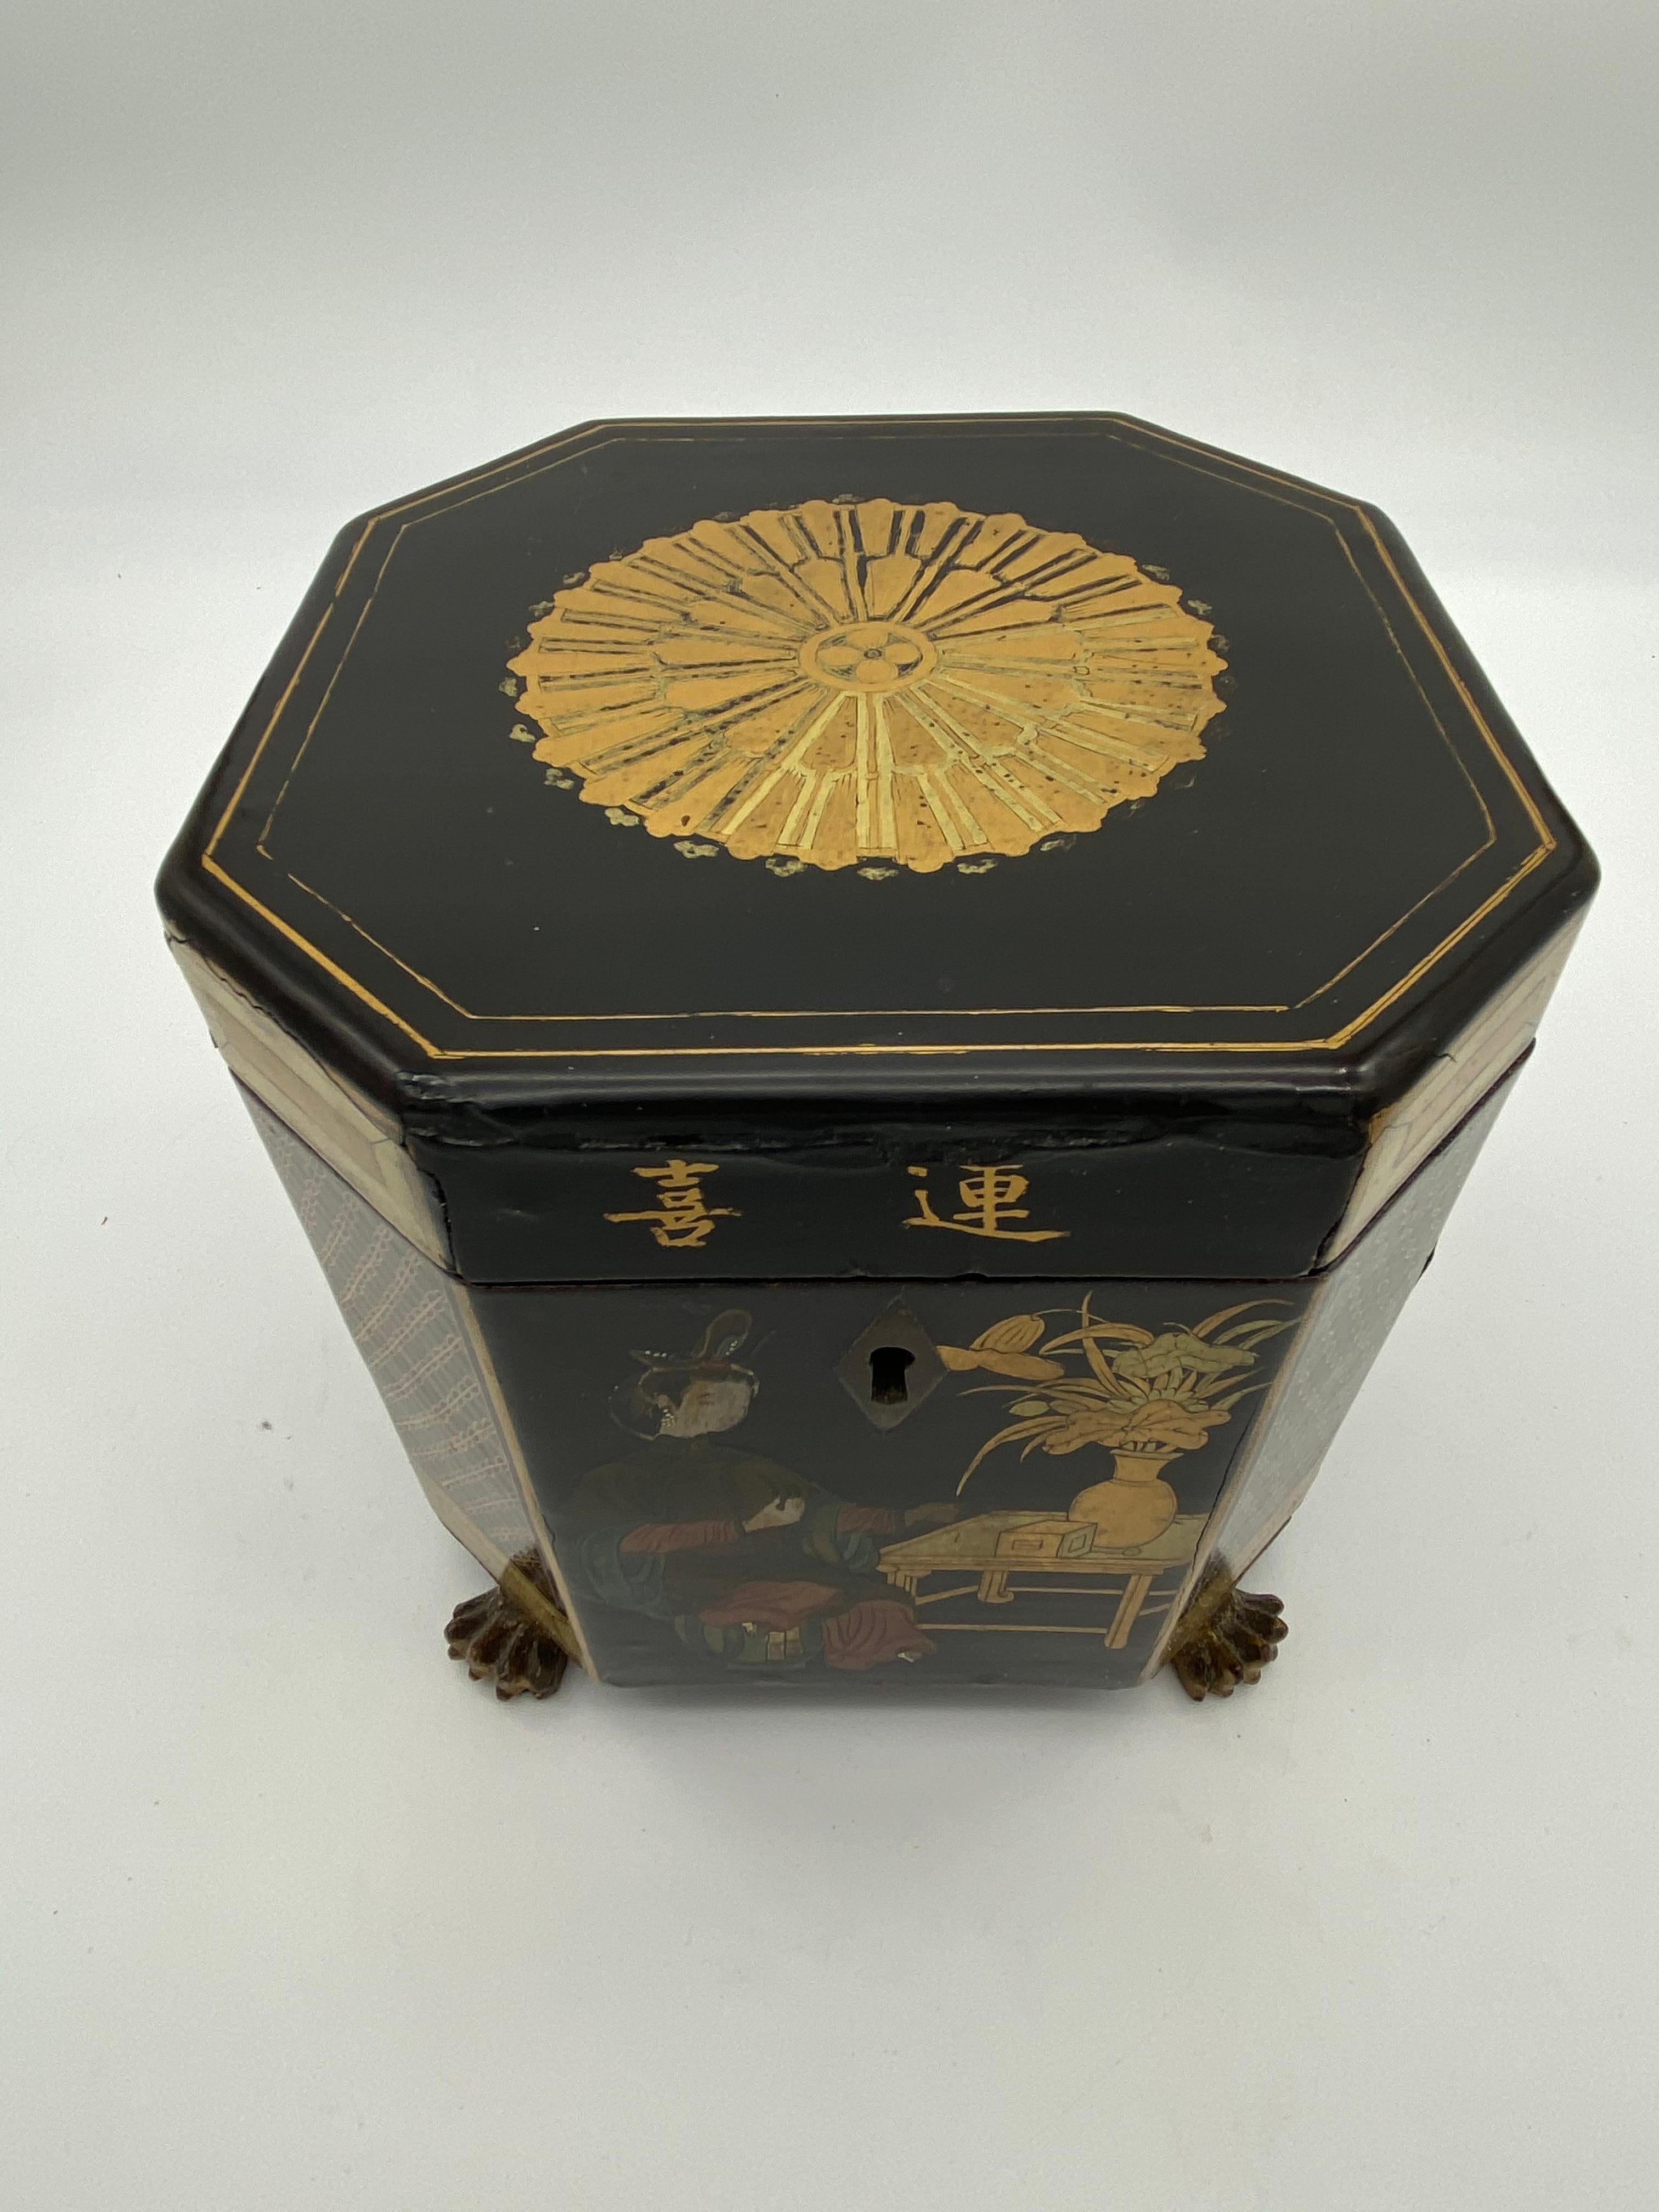 19th century Chinese gilt lacquer footed tea caddy with original pewter container from the Qing Dynasty.